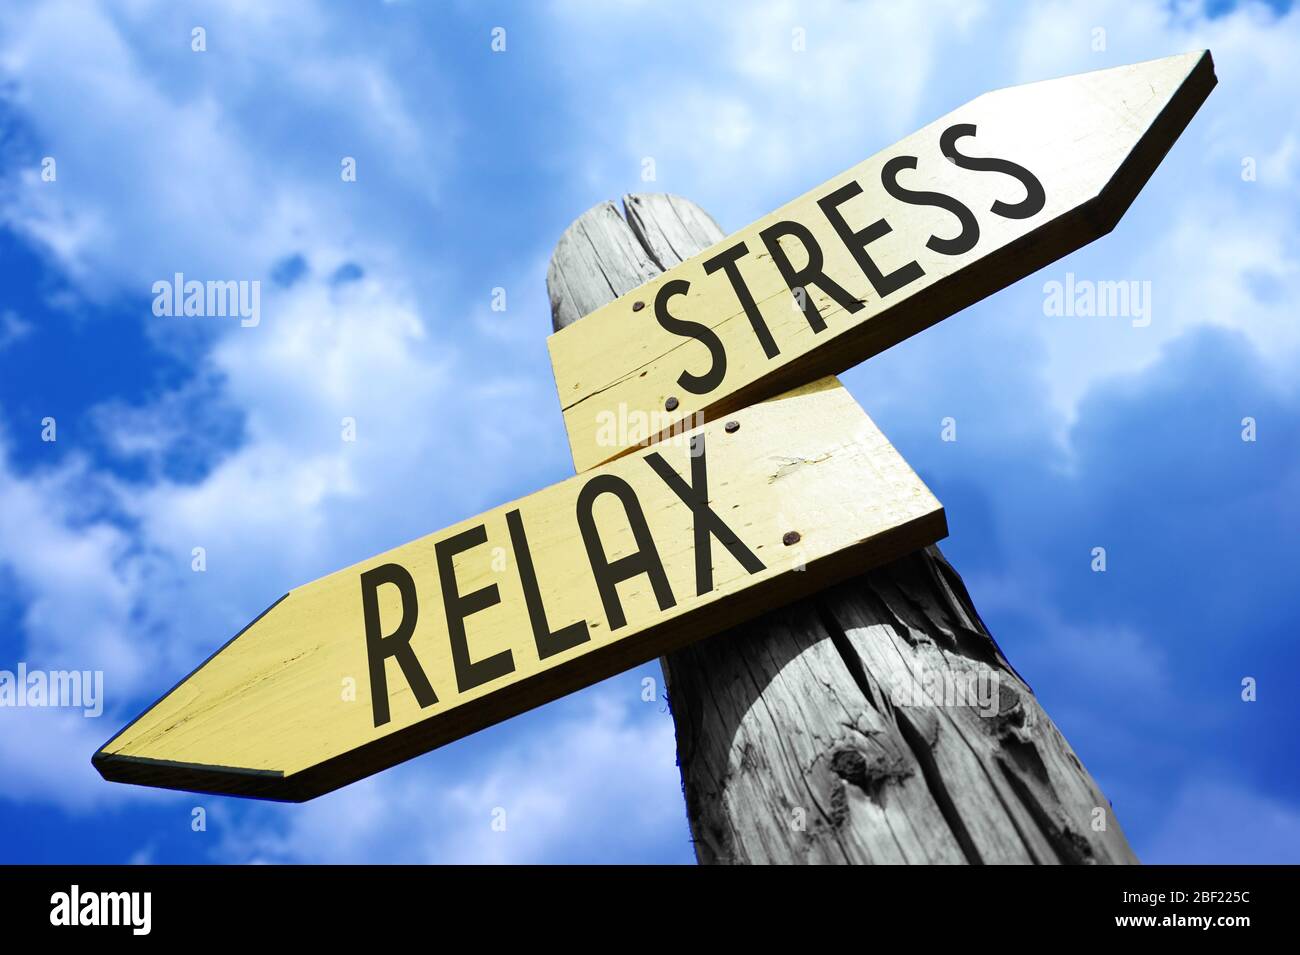 Stress, relax - wooden signpost Stock Photo